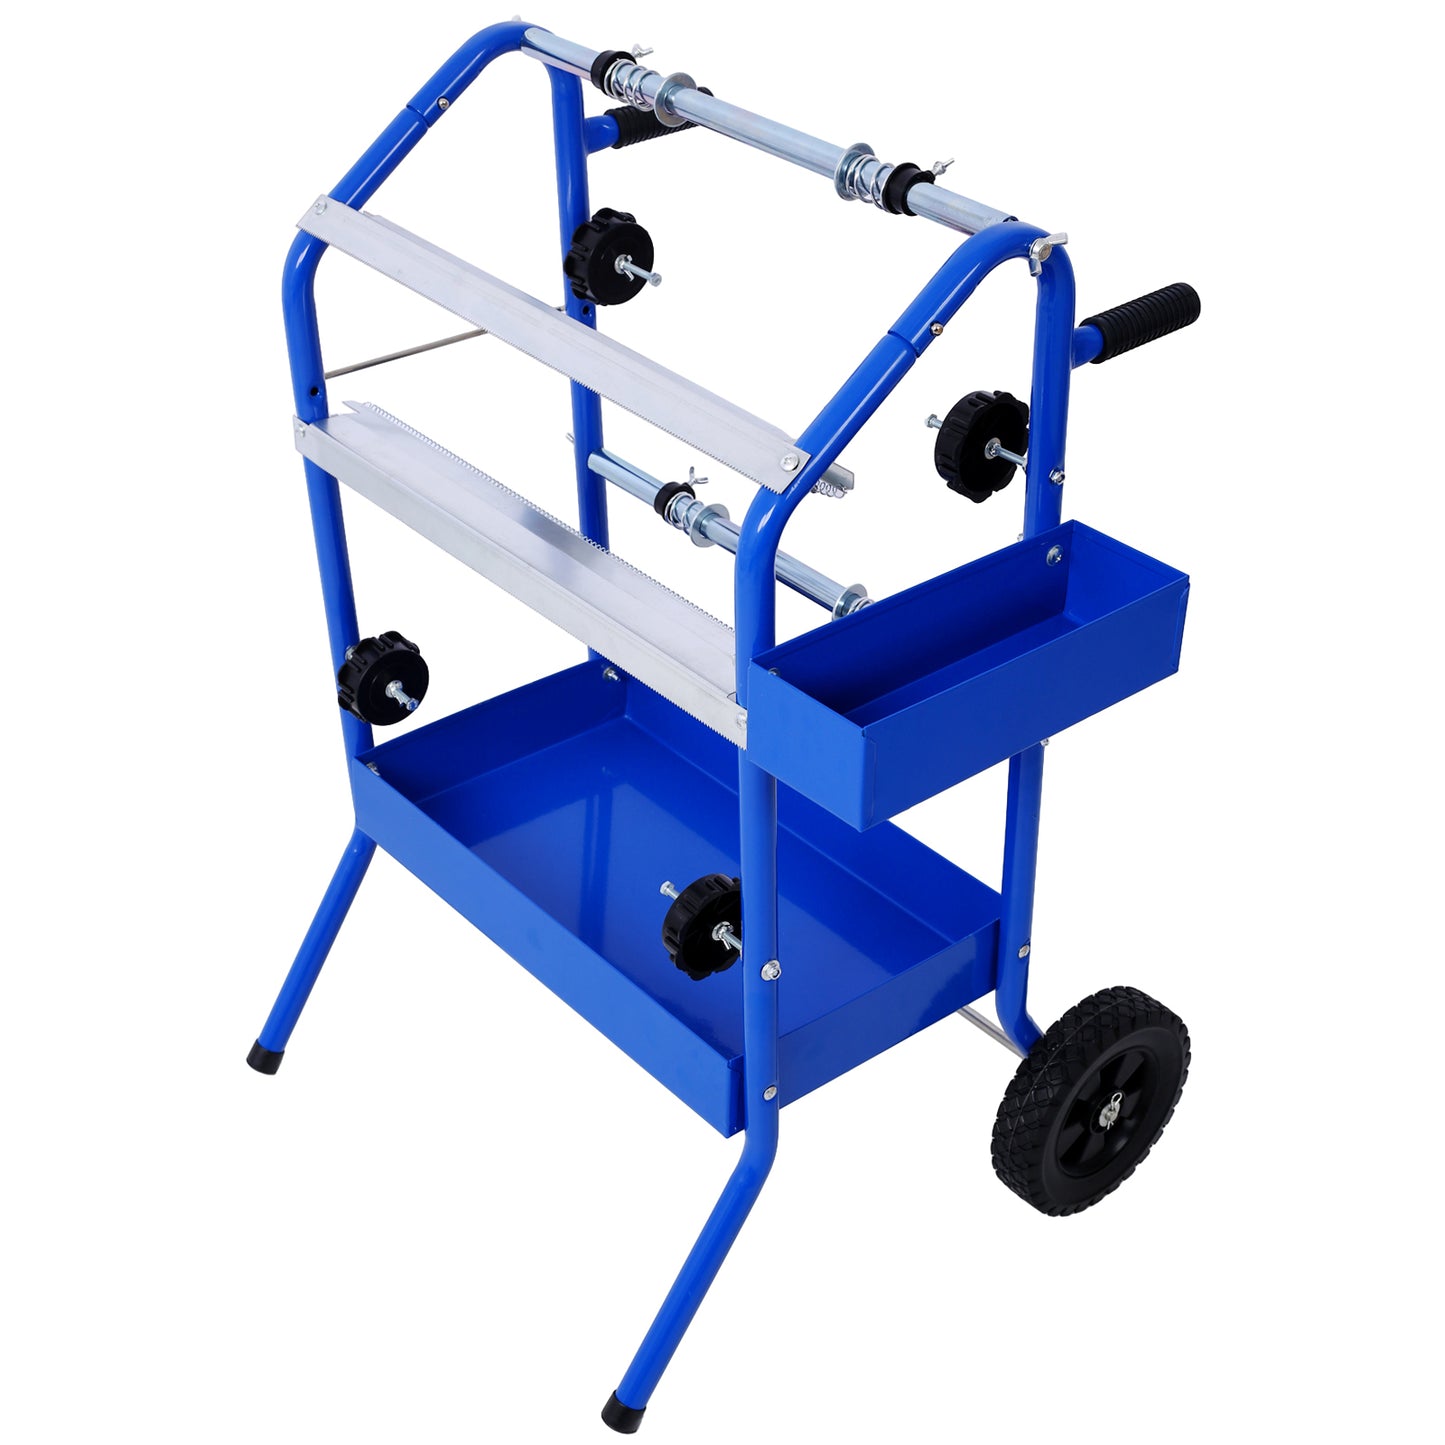 Mobile 18" Multi-Roll Masking Paper Machine with Storage Trays,BLUE